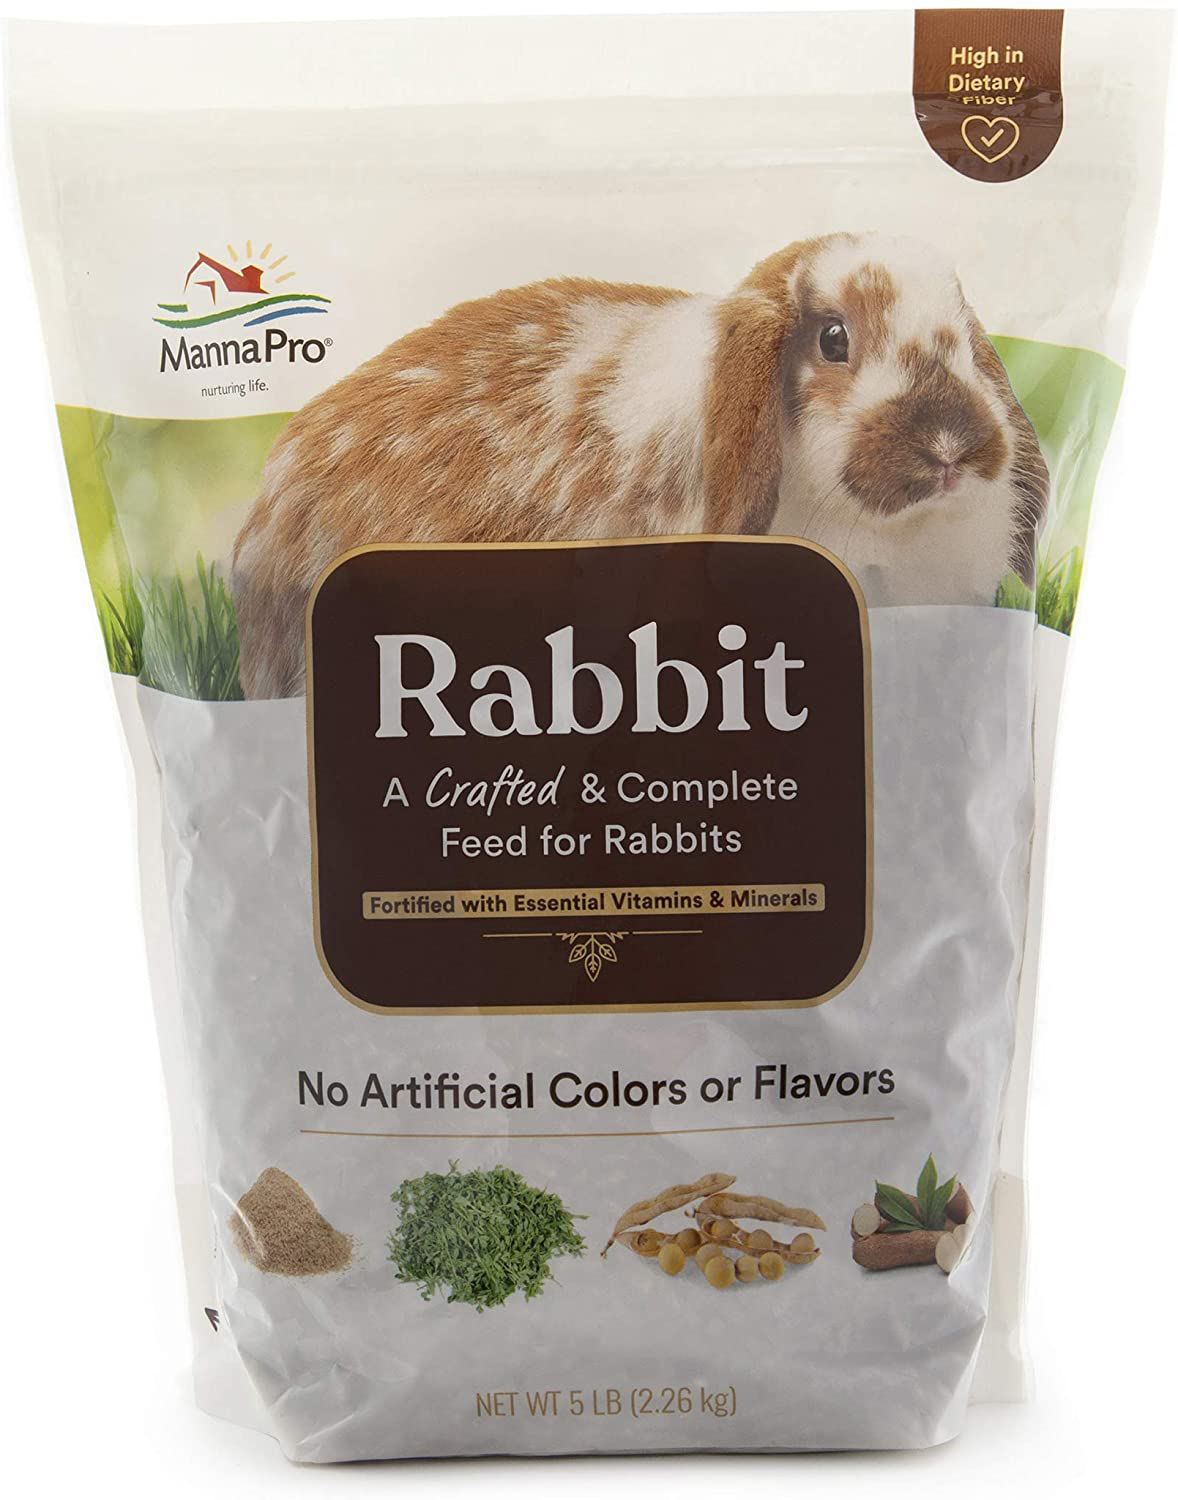 Manna Pro Rabbit Feed | with Vitamins & Minerals | Complete Feed for Rabbits | No Artificial Colors or Flavors | 5Lb